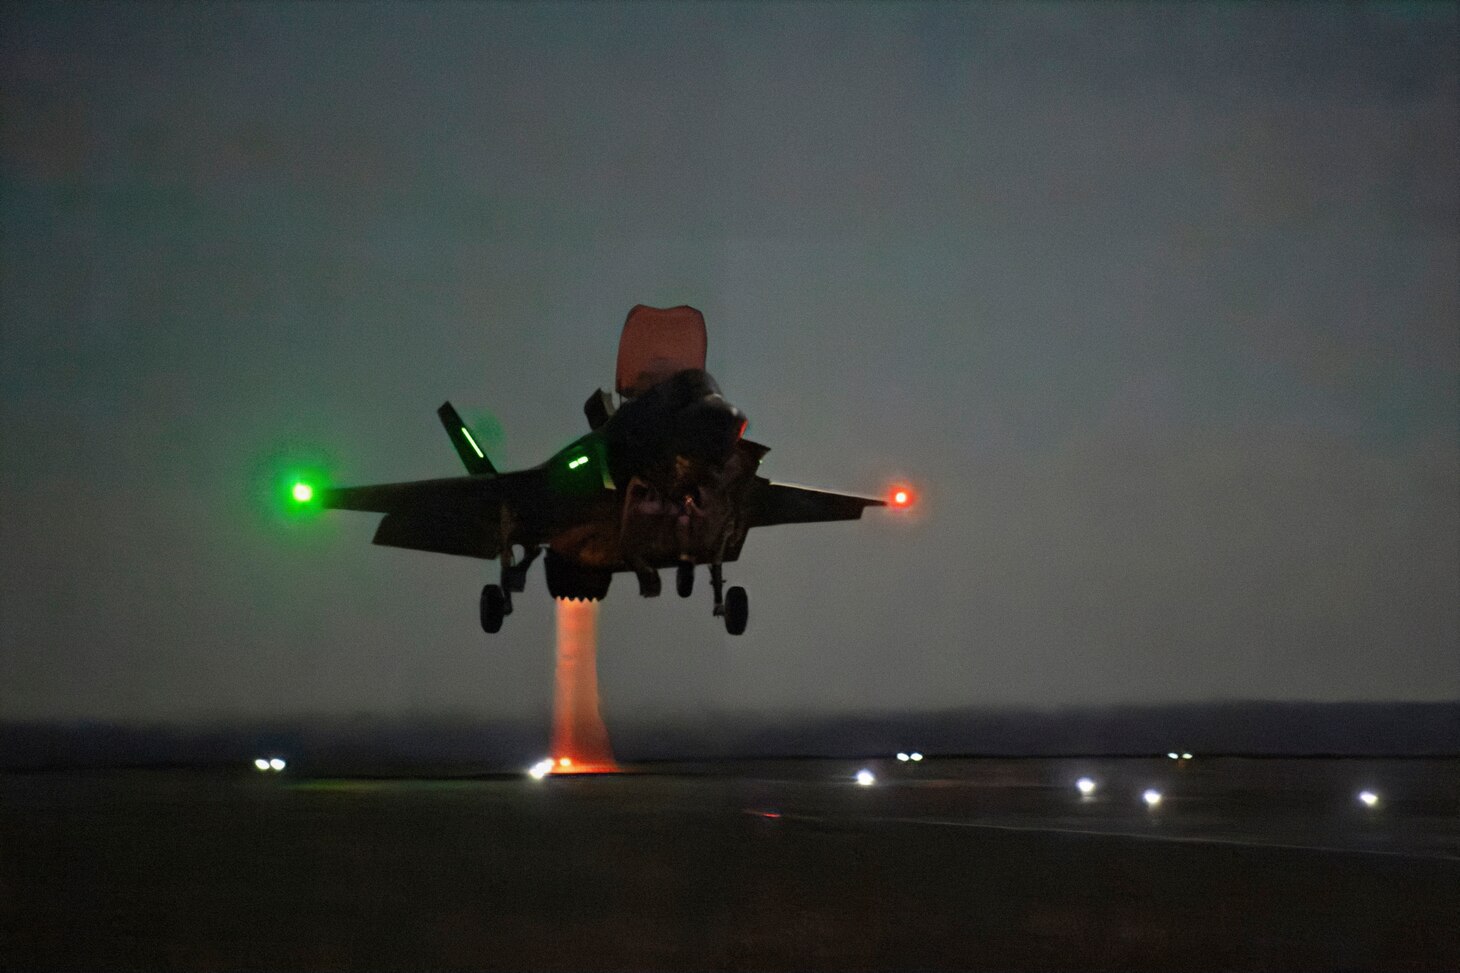 U.S. Marine Corps test pilot Maj. Paul Gucwa performs a vertical landing (VL) in an F-35B Lightning II short takeoff vertical landing (STOVL) variant strike fighter during a mission to expand the flight envelope for the technique aboard the U.K. aircraft carrier HMS Prince of Wales (R09) Oct. 29, 2023. Gucwa also performed the first night shipborne rolling VL (SRVL) during the evening’s flight period. Gucwa is one of three test pilots from embarked with a broader team from the Patuxent River F-35 Integrated Test Force (PAX ITF) to conduct flight test during the ongoing developmental test phase 3 (DT-3) flight trials. HMS Prince of Wales, the U.K.’s newest aircraft carrier and biggest warship, is deployed to the Western Atlantic for WESTLANT 23.